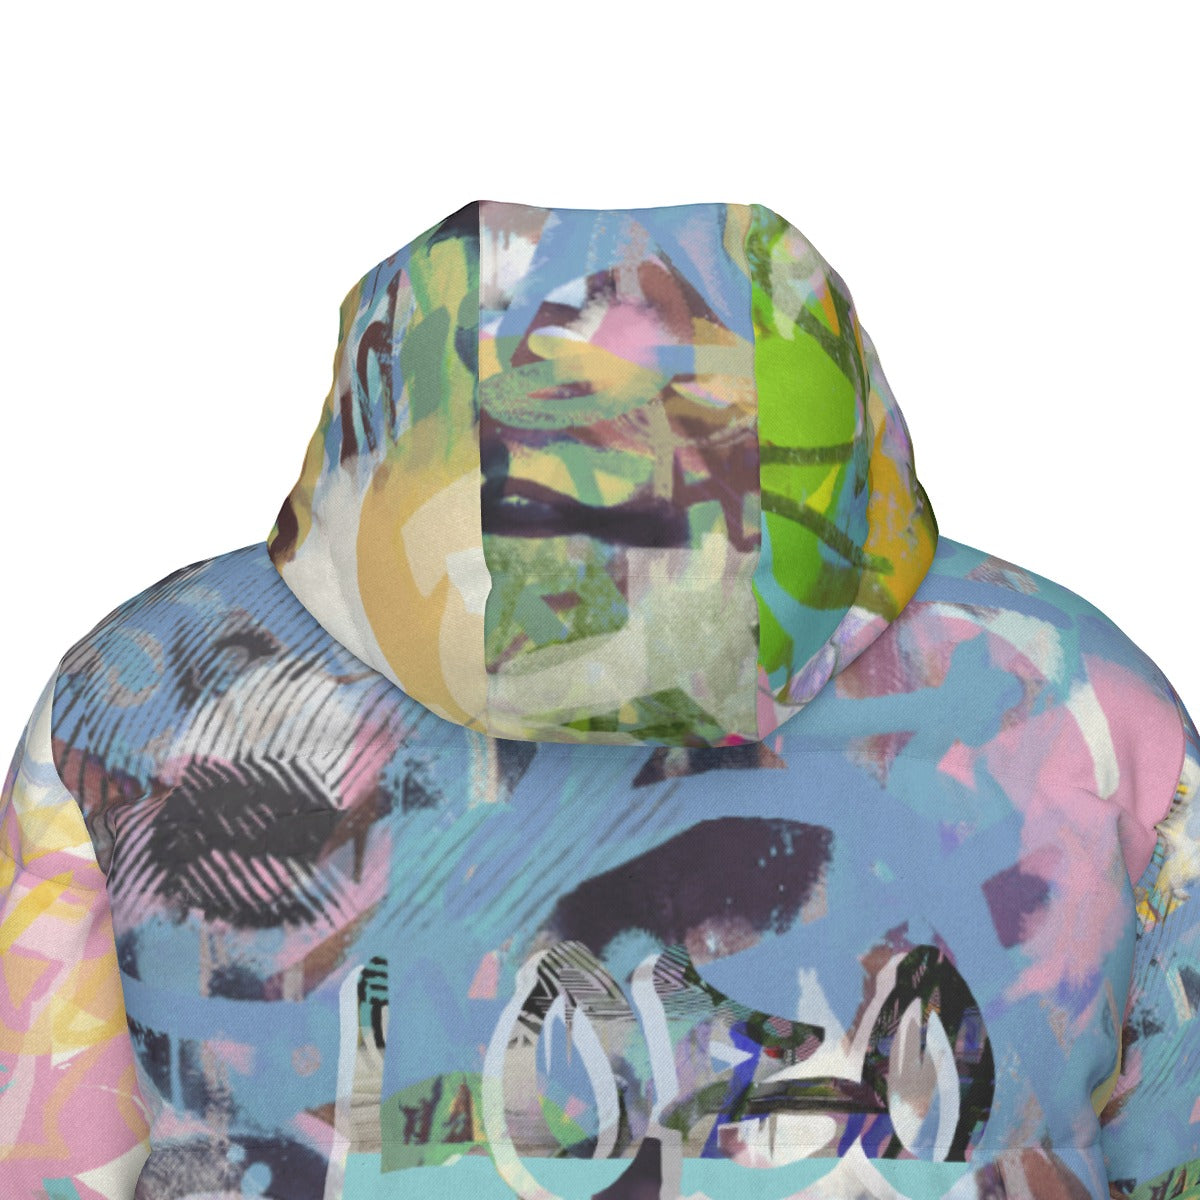 All-Over Print Unisex Long Down Jacket Yoycol